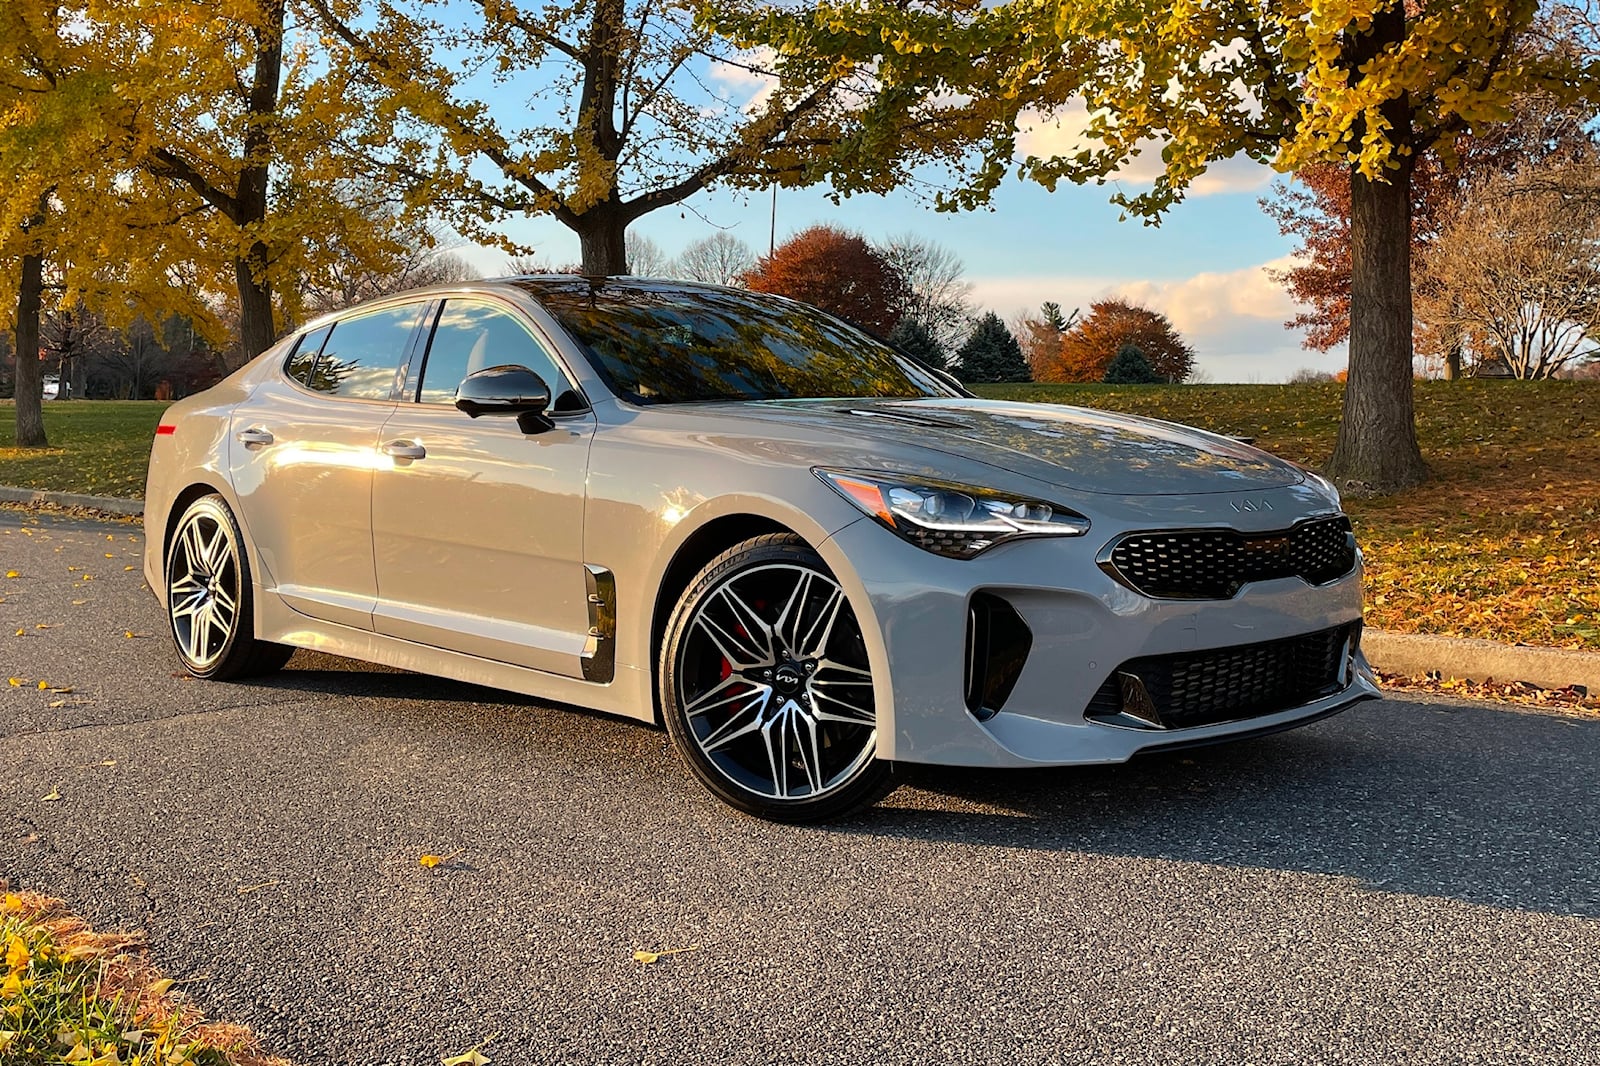 Used Kia Stinger Awd For Sale Buy All Wheel Drive Sedan With Best